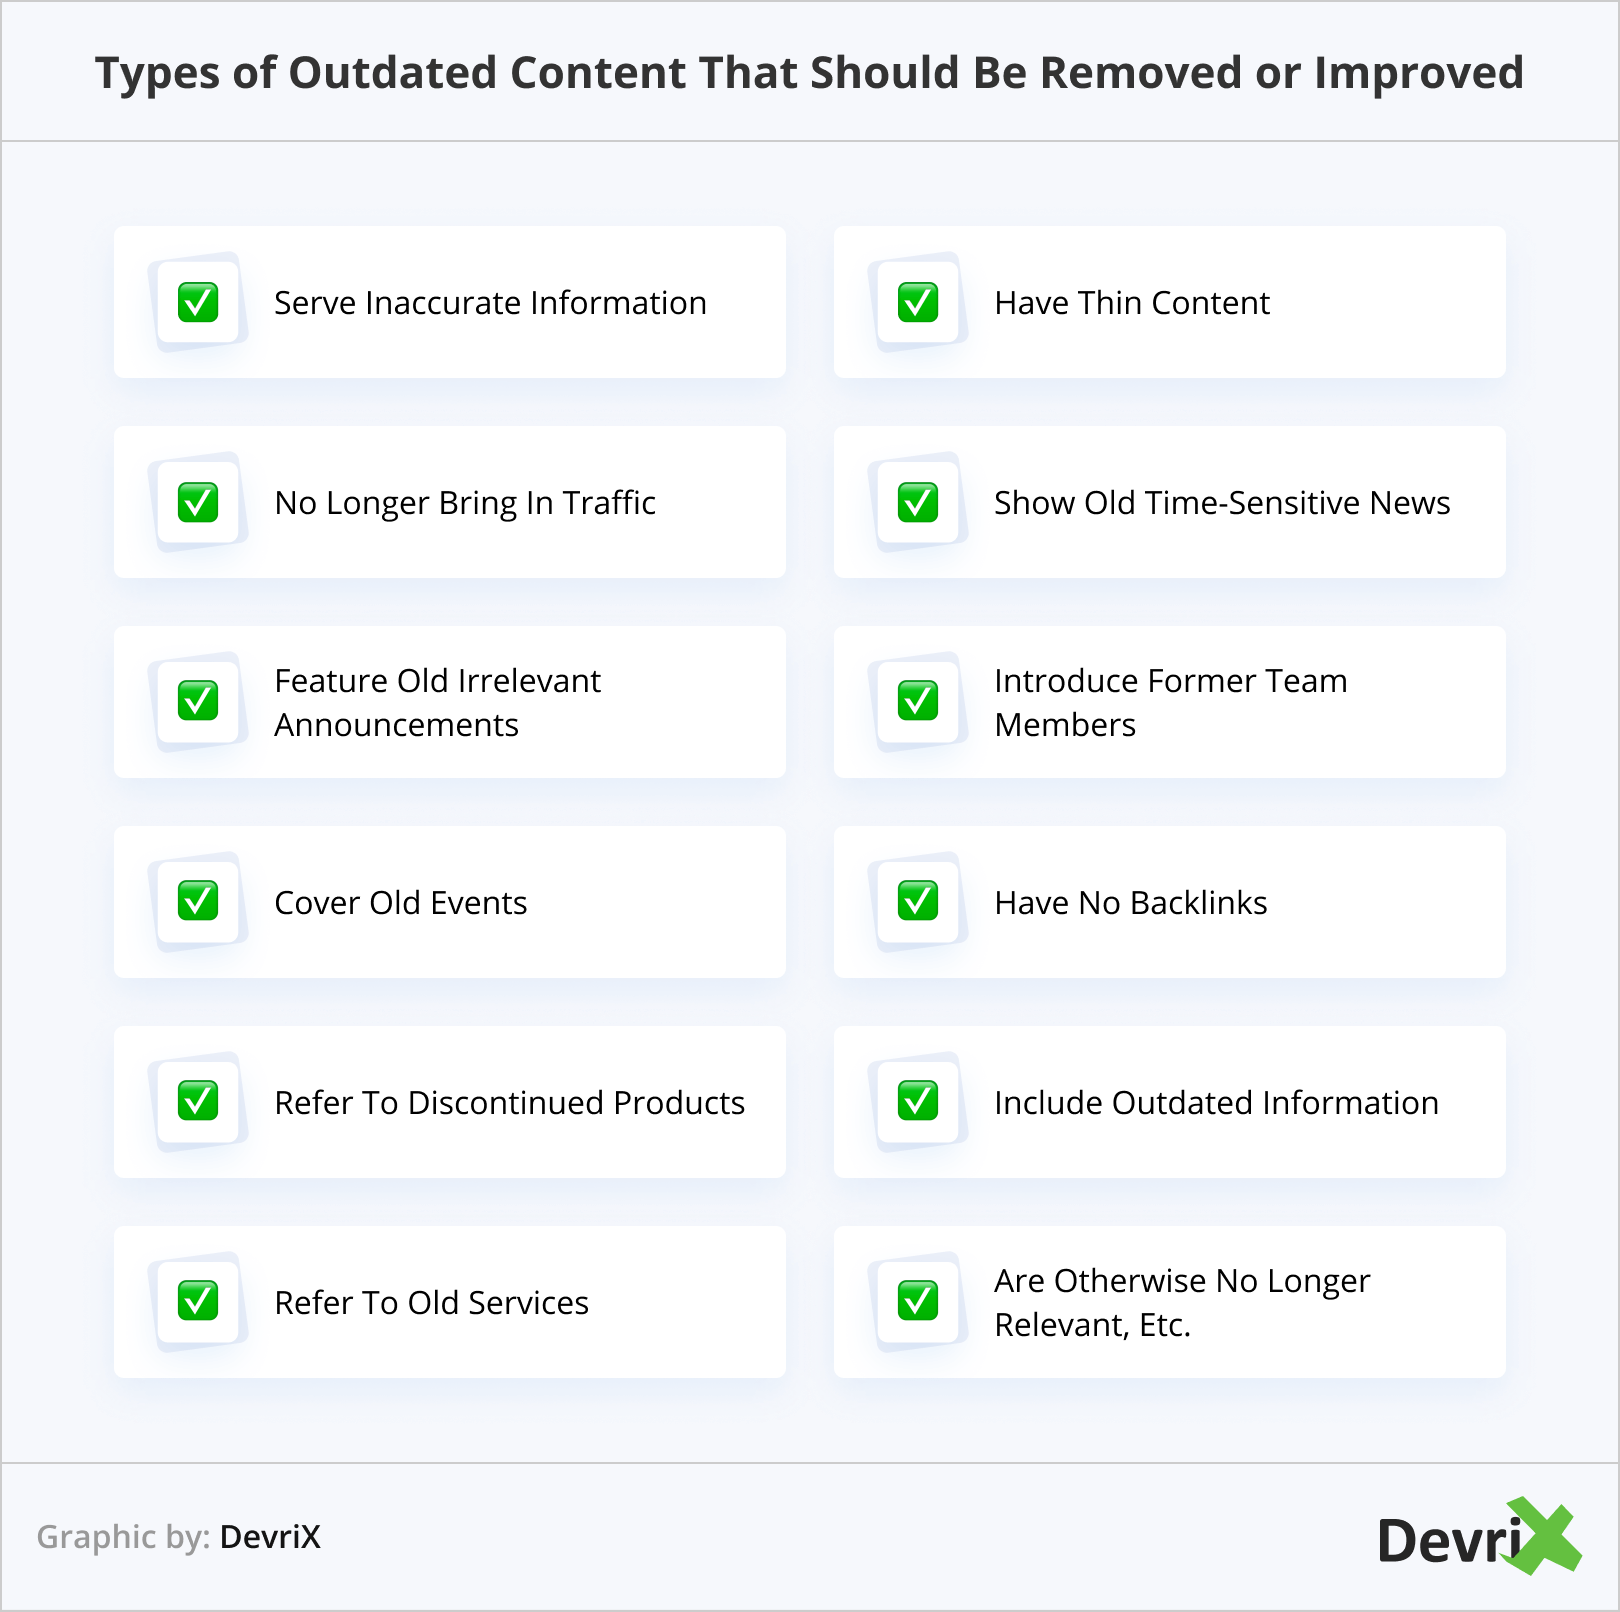 Types of Outdated ContentтАиThat Should Be Removed or Improved